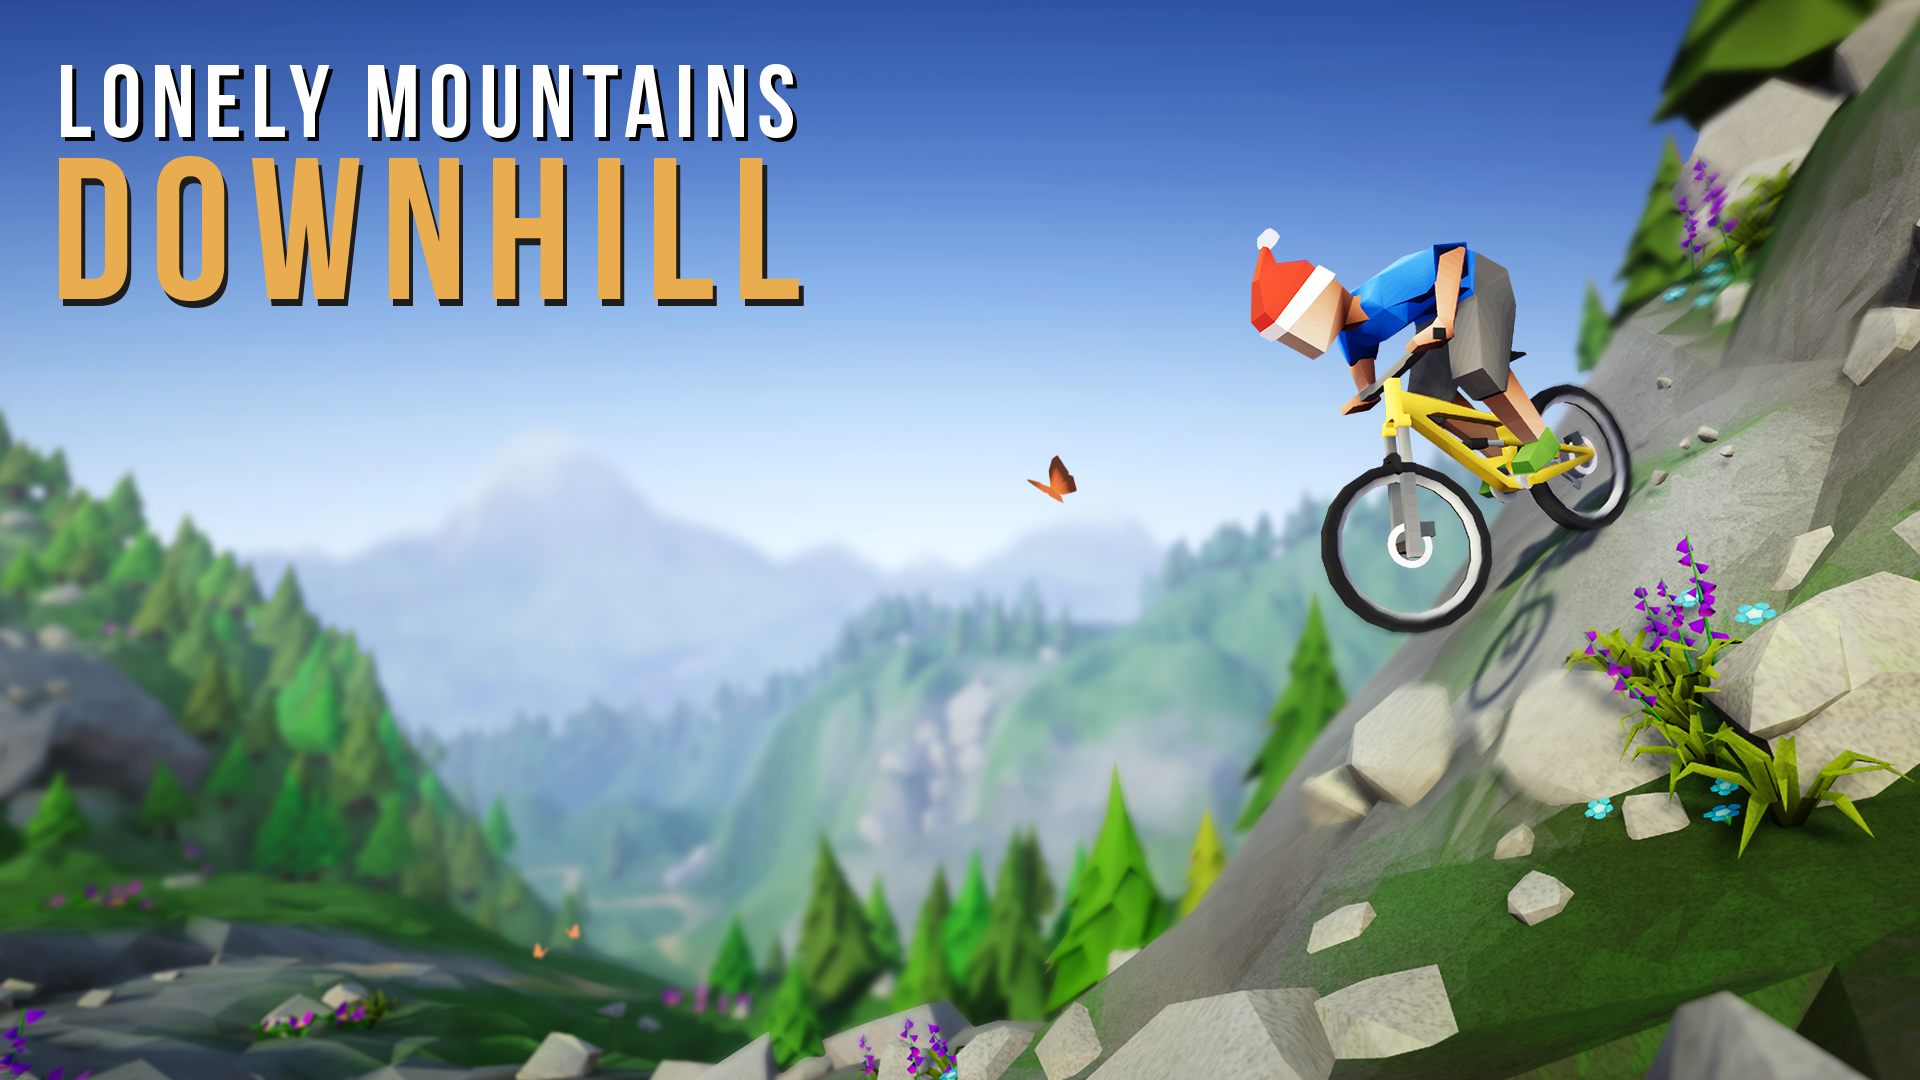 Lonely mountains downhill